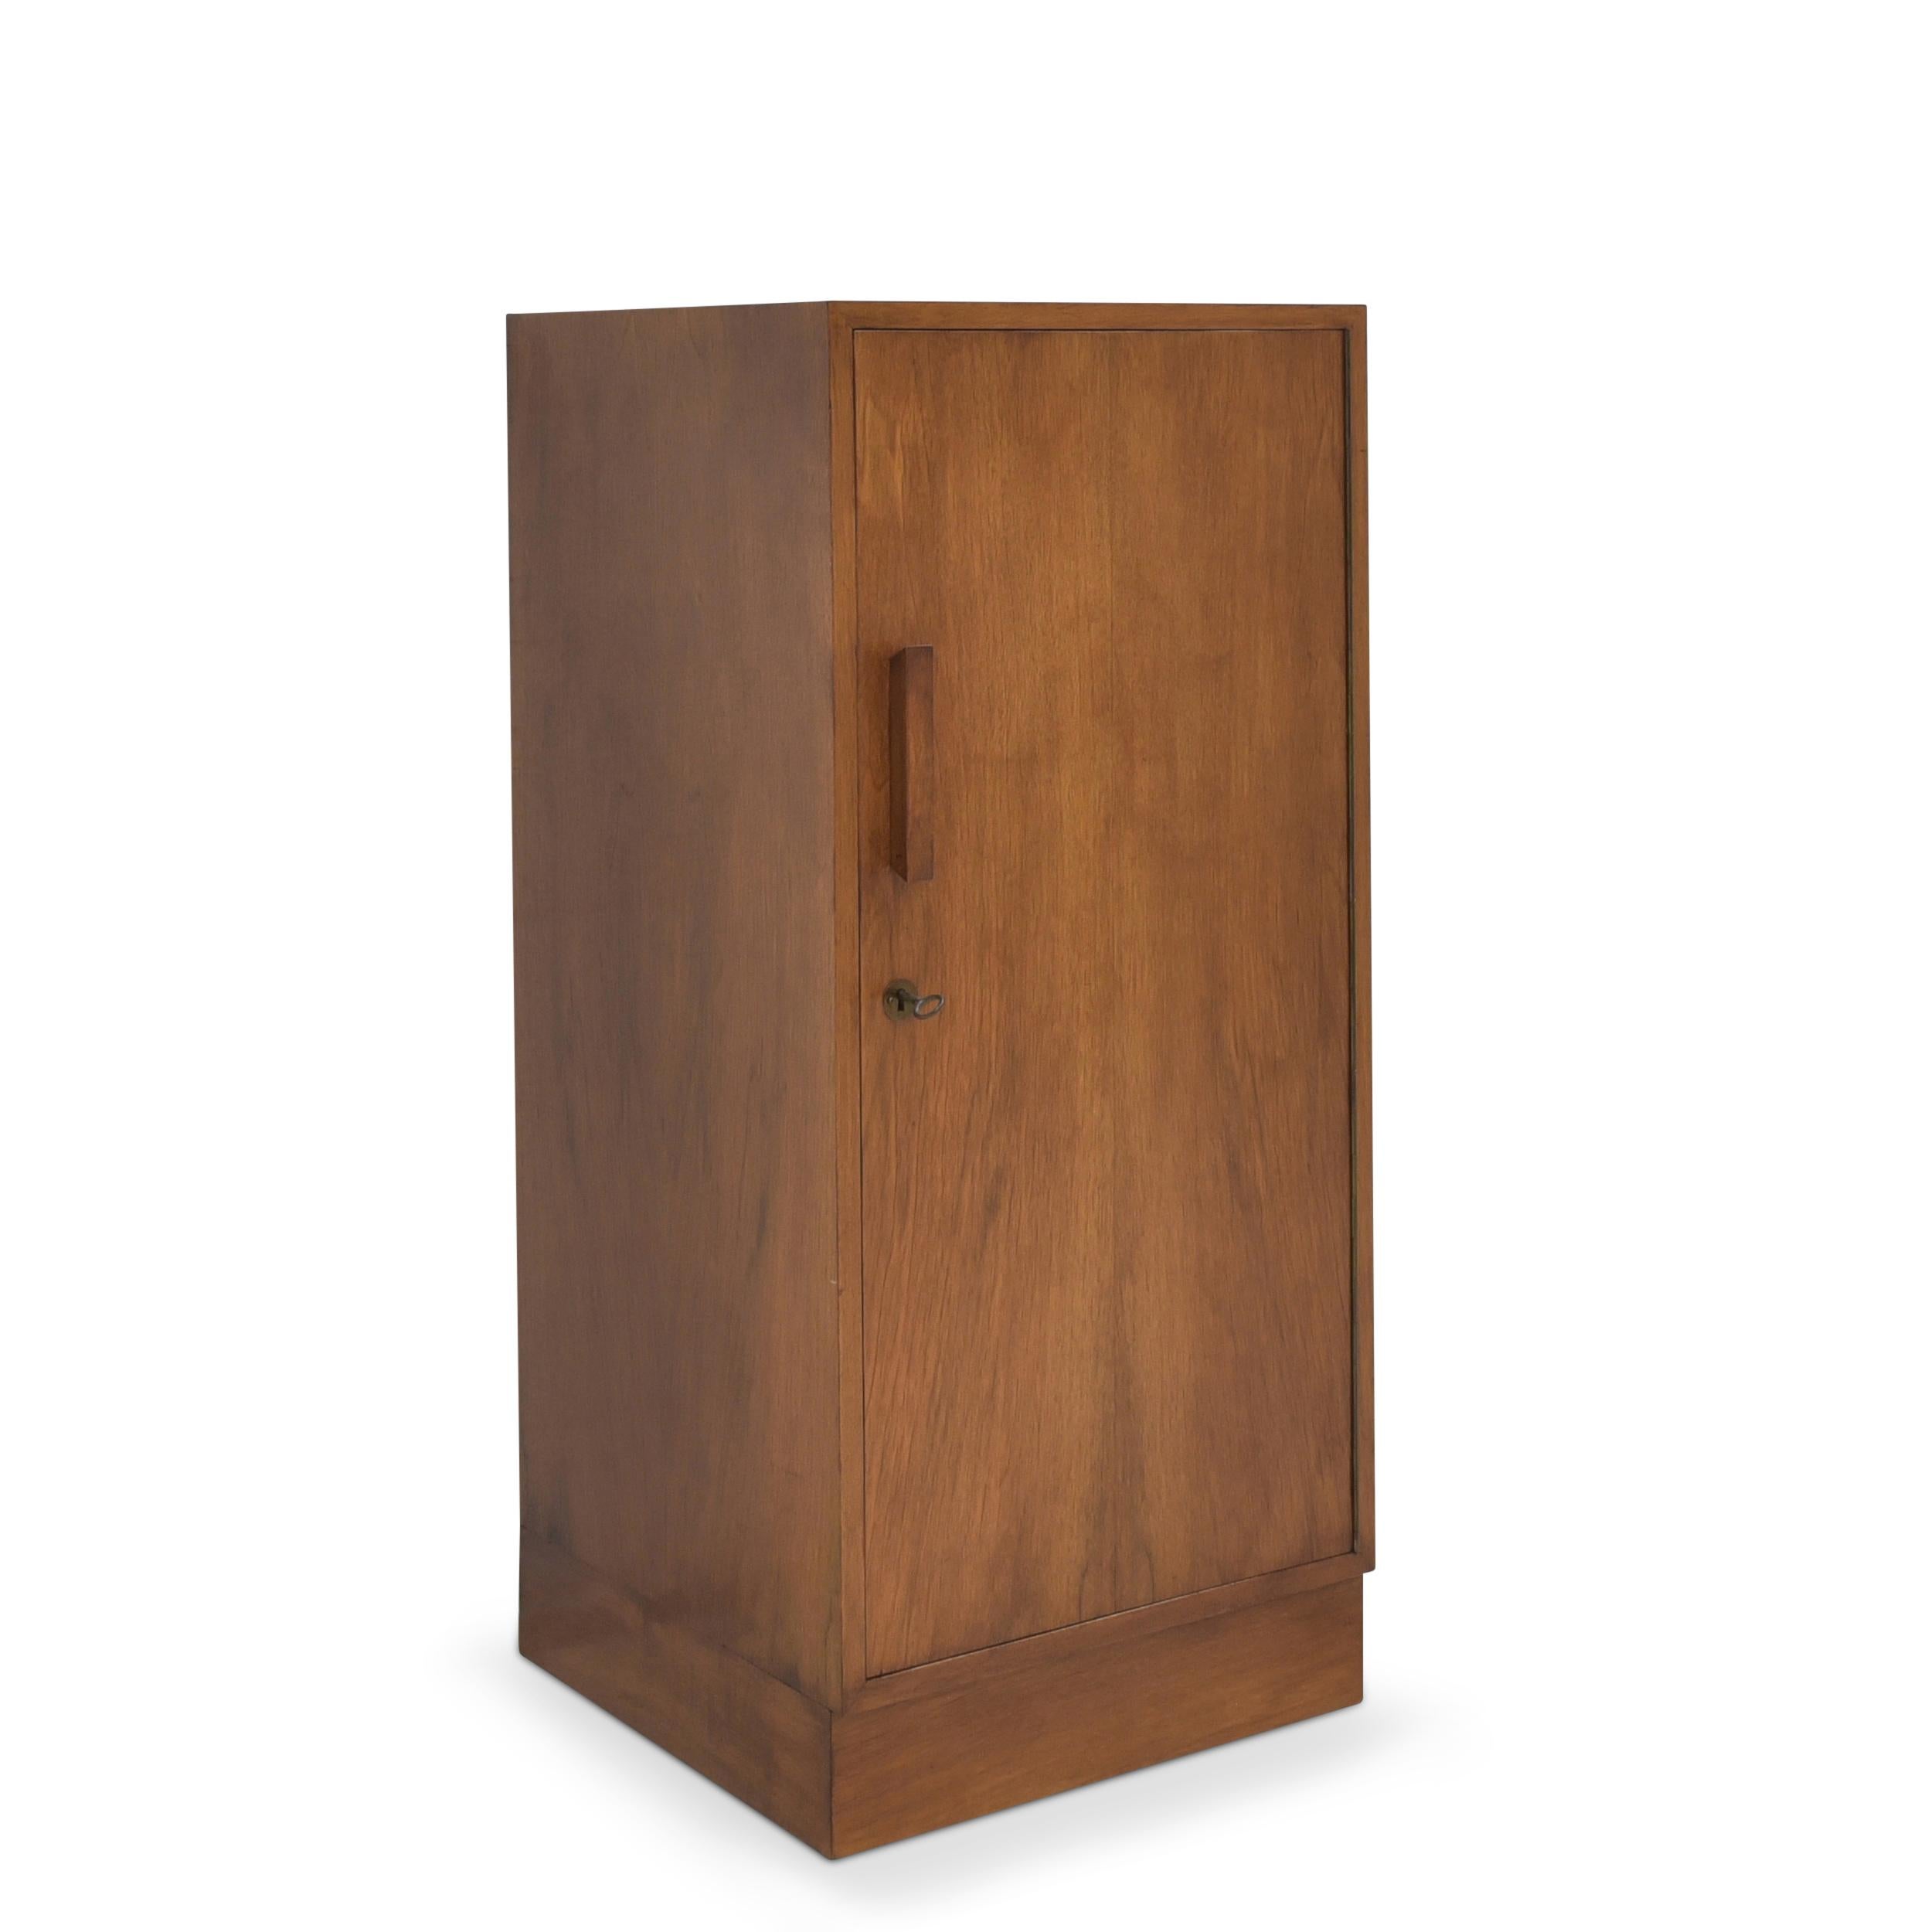 Retro Narrow Chest of Drawers Restored midcentury Art Deco 1950 Cabinet Small

Features:
Single-door model with ten glass shelves
Original handle and fittings
No-nonsense design
Beautiful patina

Additional information:
Material: Walnut